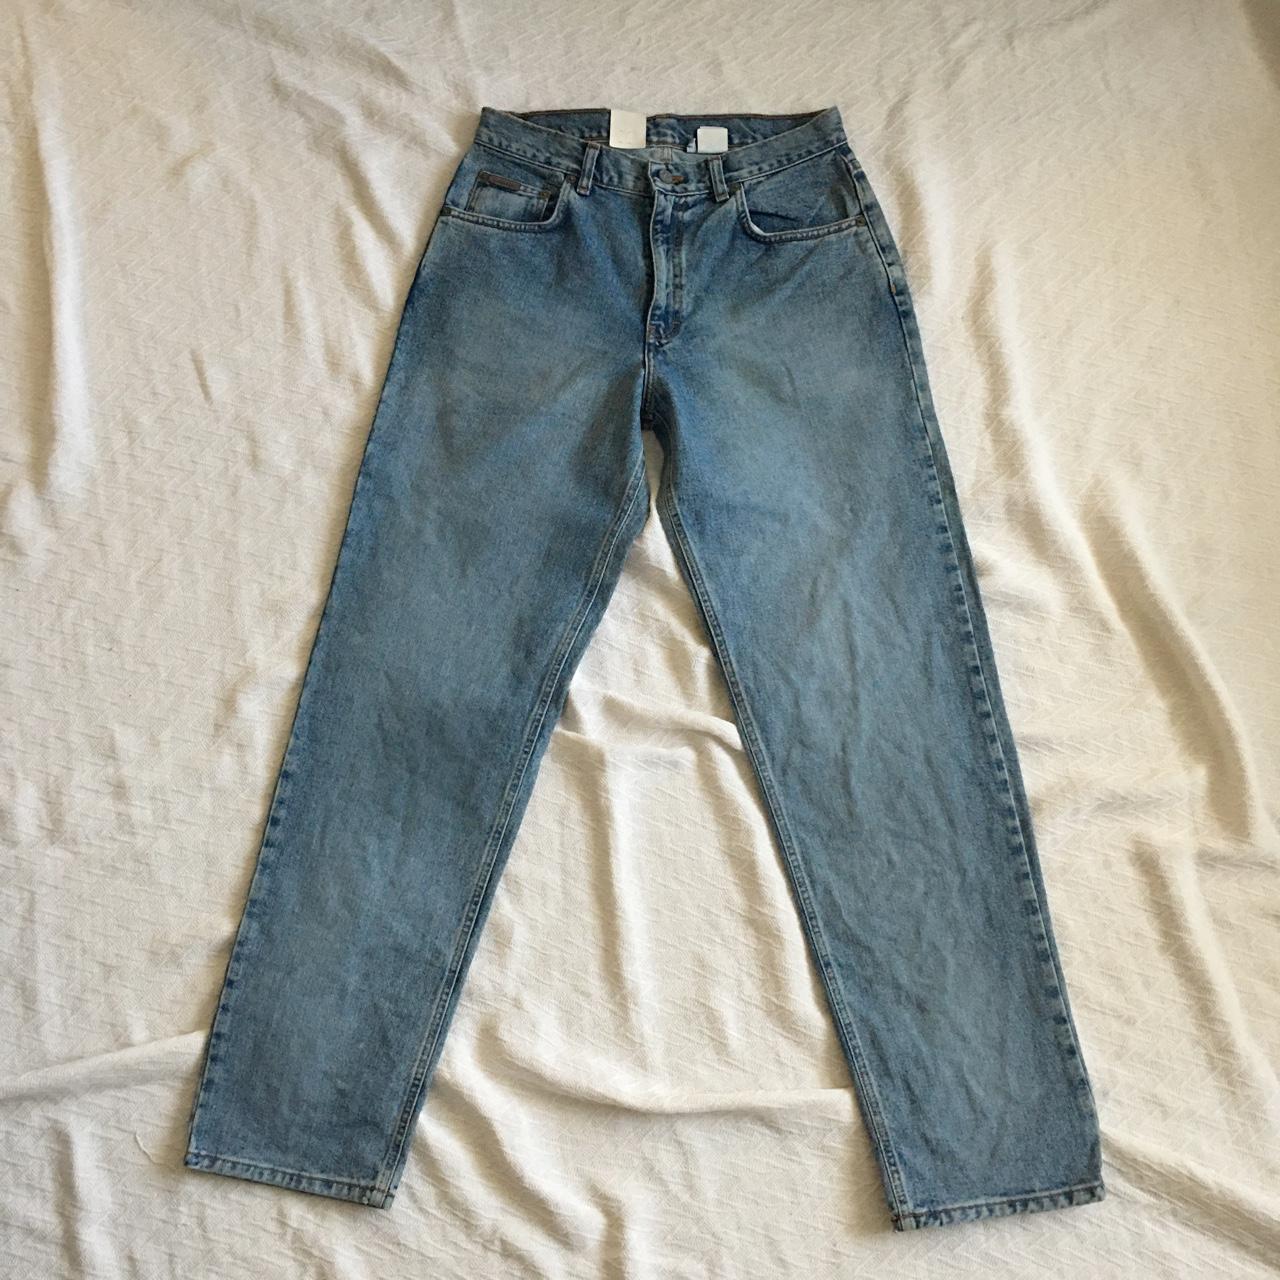 Brand new Calvin Klein Jeans. Labeled as 32 x... - Depop